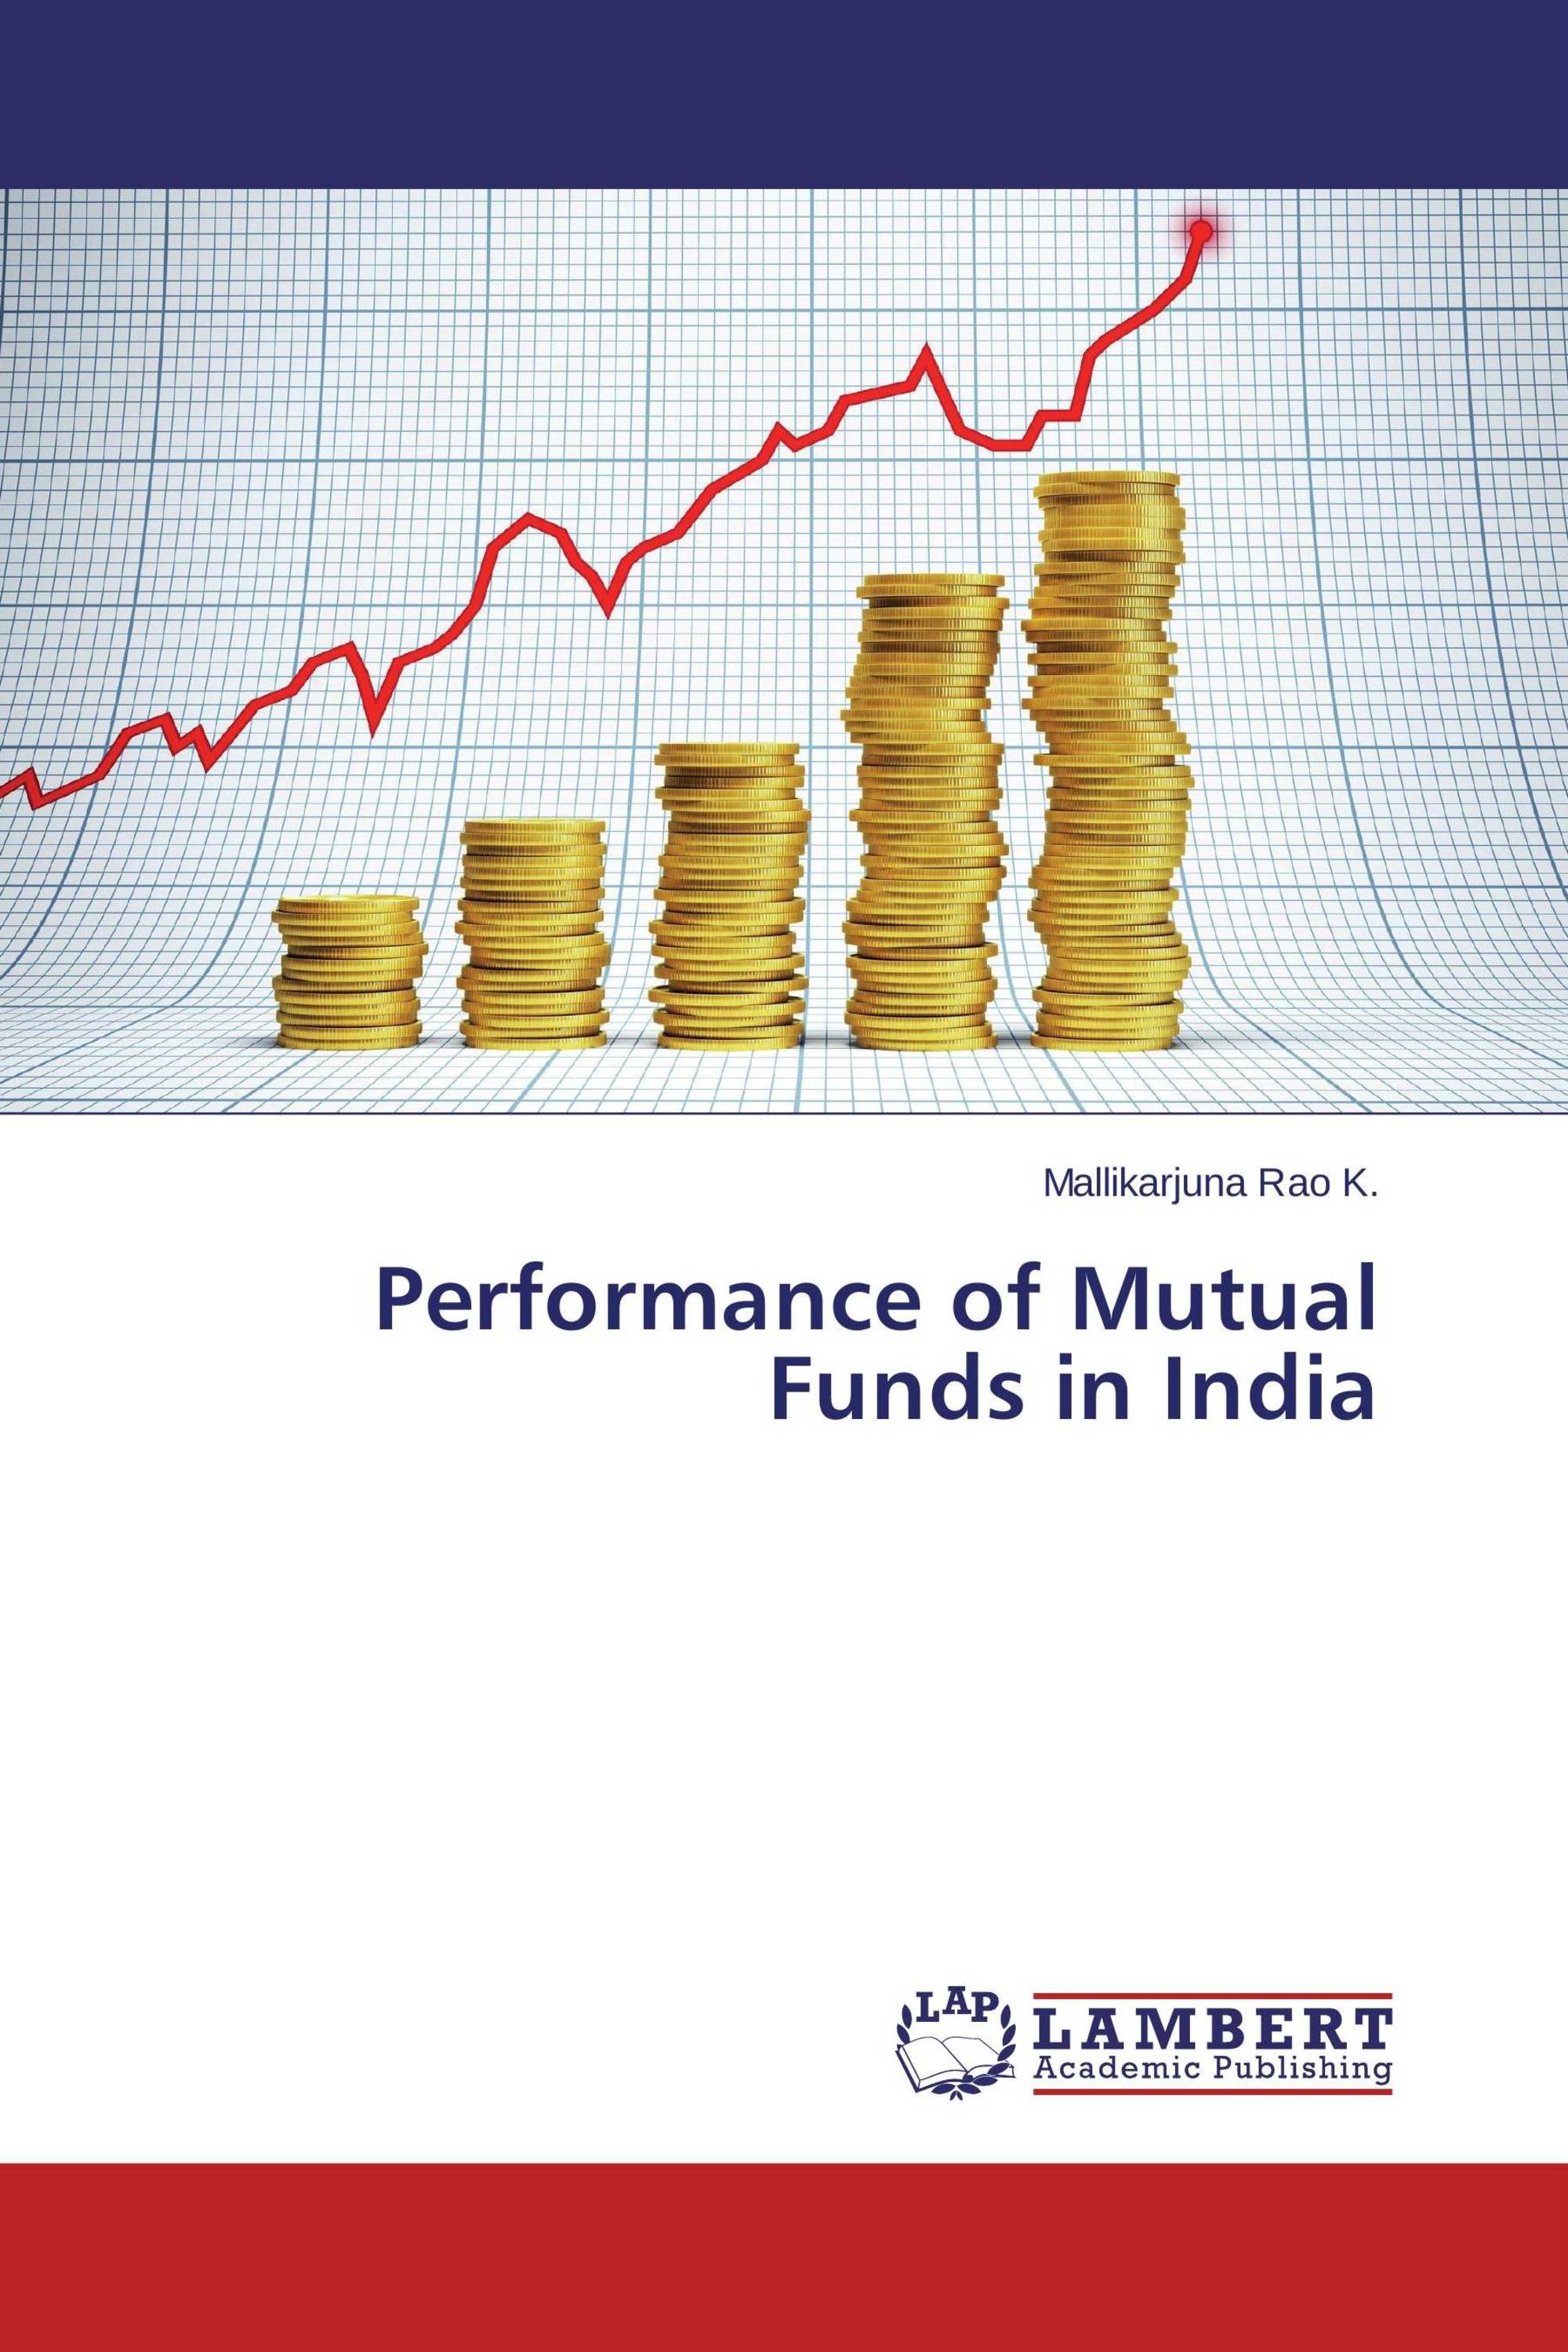 literature review of mutual fund